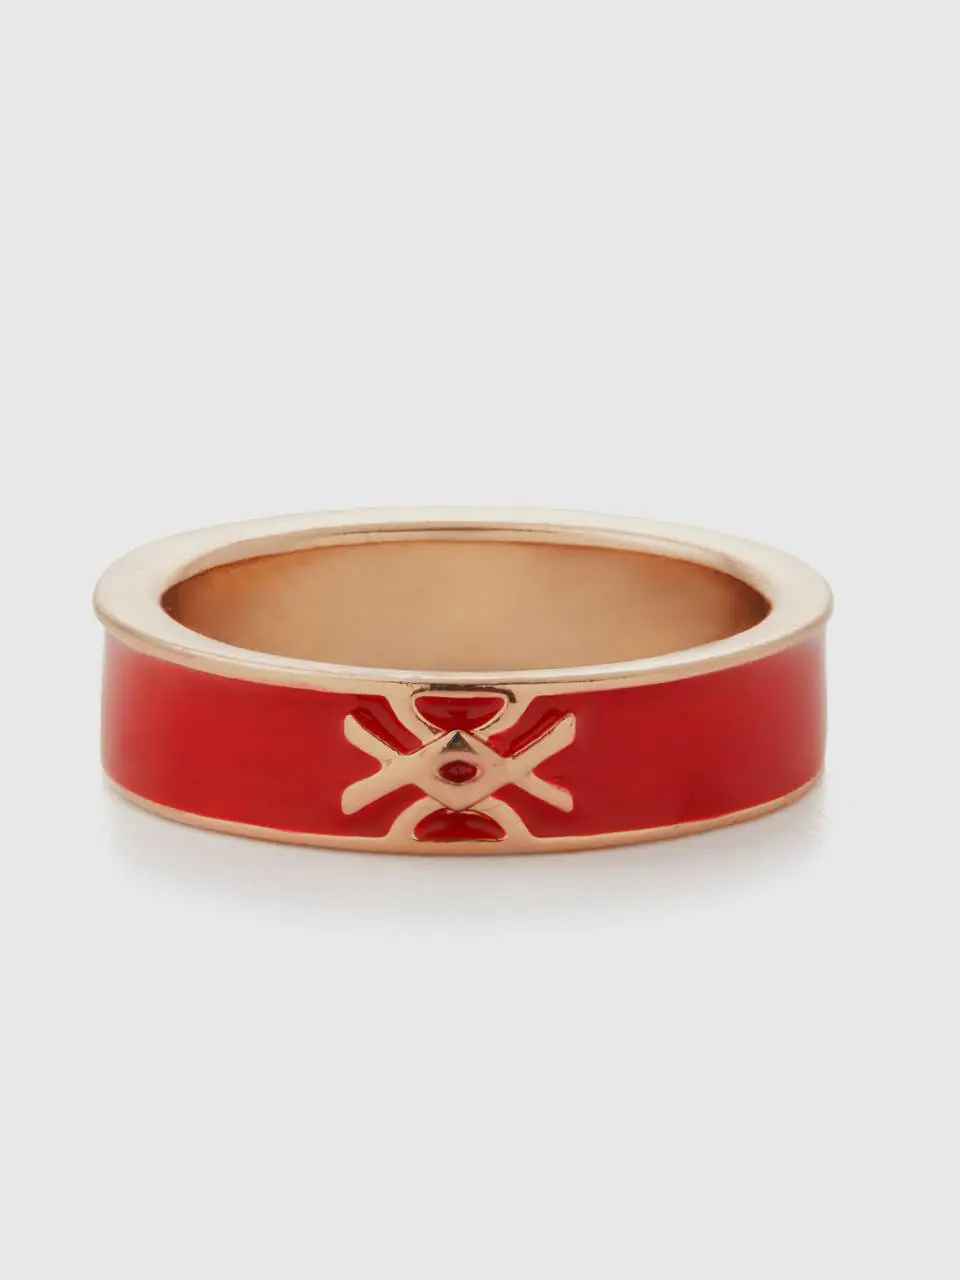 Benetton strawberry red band ring with logo. 1